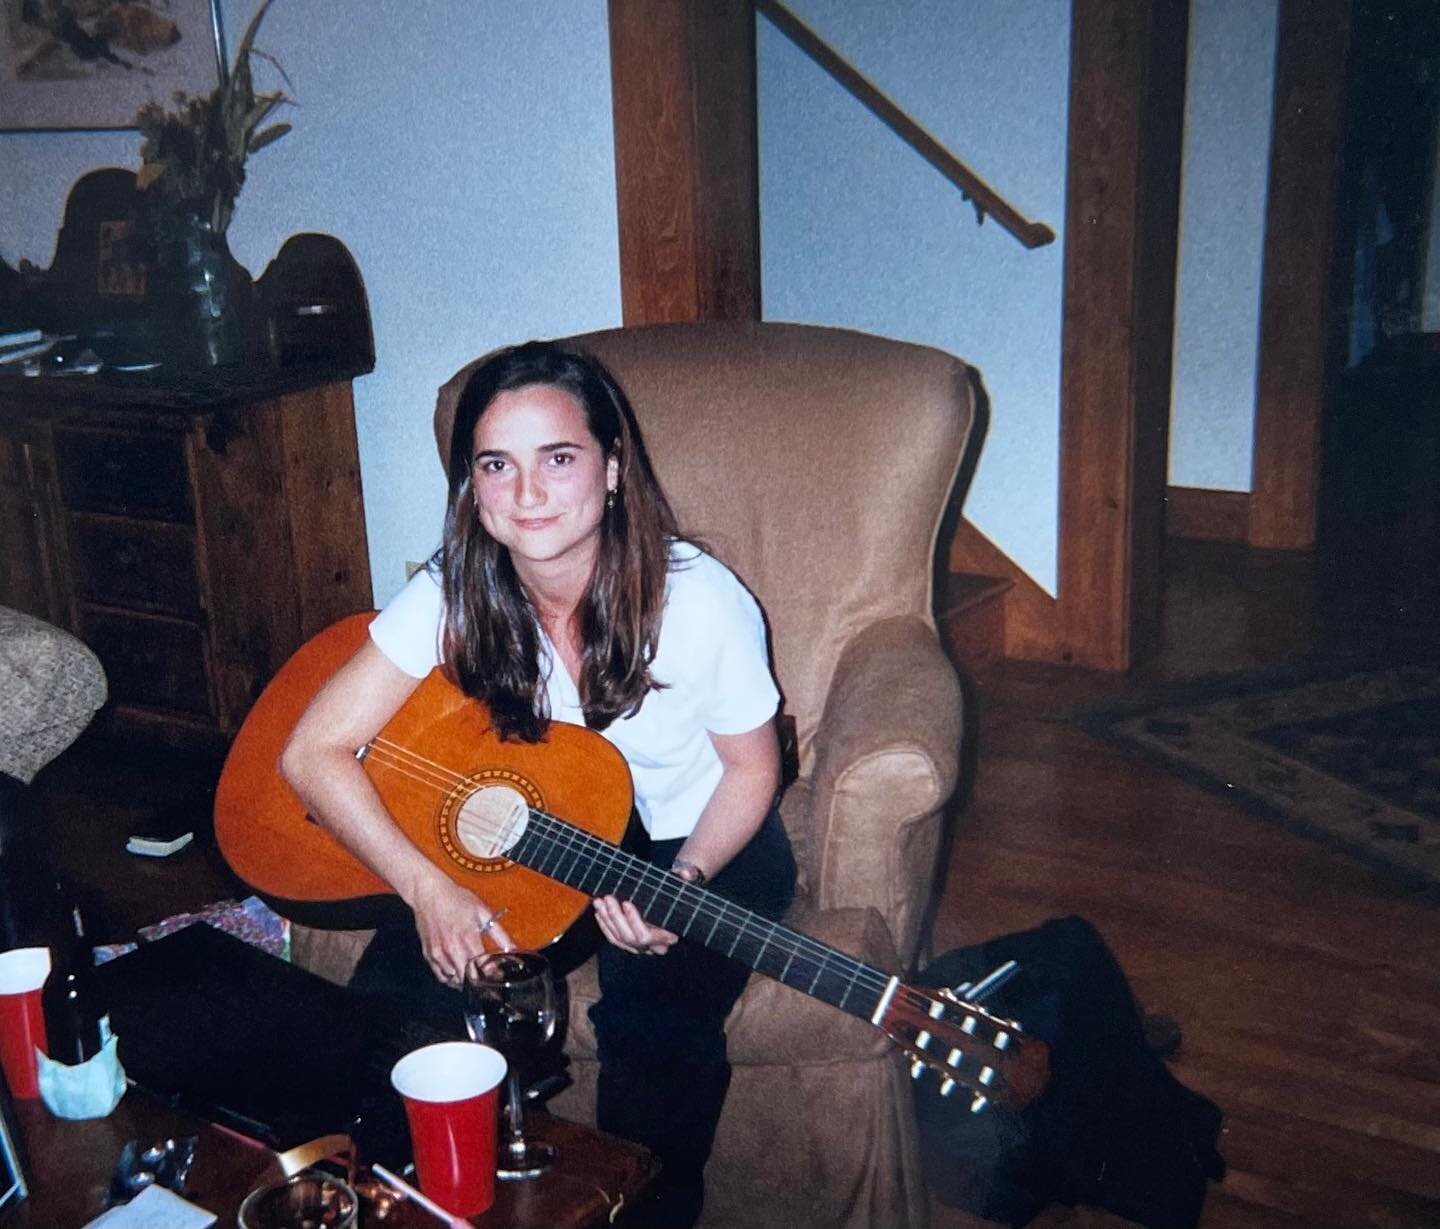 Throwback to the late &lsquo;90s when Yvette wrote a song for her friend&rsquo;s bachelorette weekend. 🎉

Sadly, music and lyrics are lost in time&hellip;maybe @freera prefers it that way. 😉

#tbt #throwbackthursday #throwback #90s #90snostalgia #d